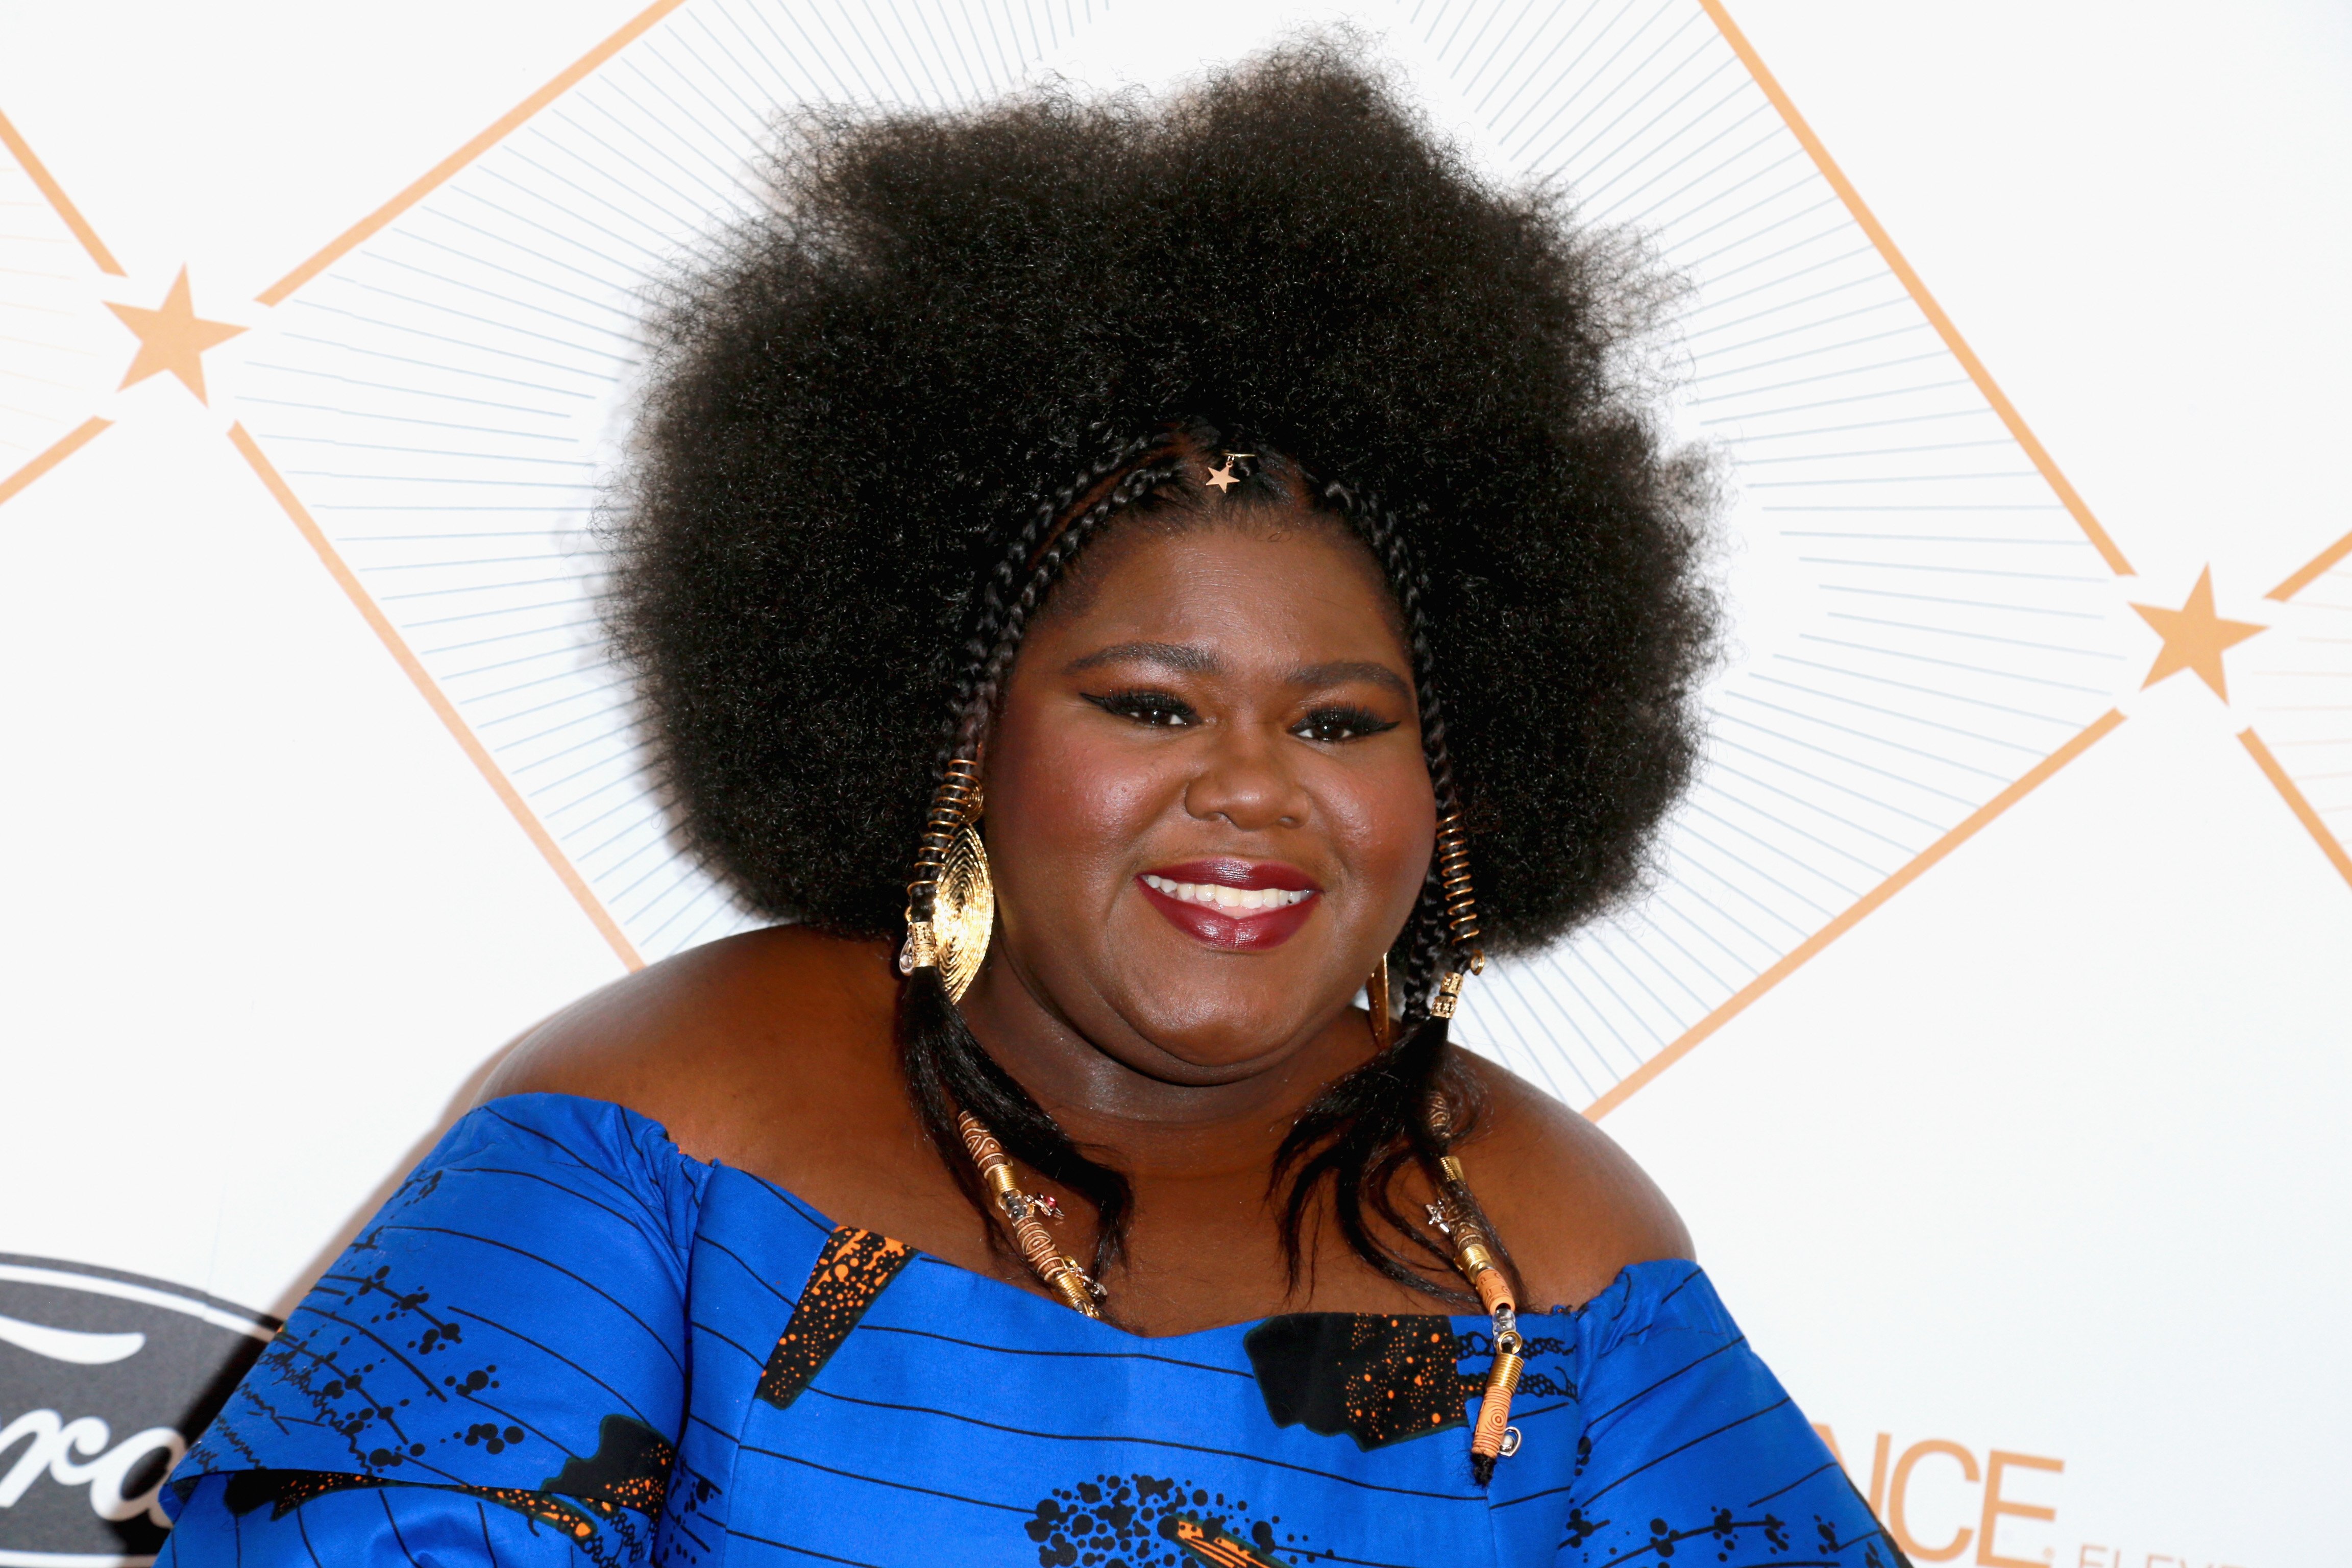 Gabourey Sidibe poses at the 2018 Essence Black Women In Hollywood Oscars Luncheon on March 1, 2018. | Photo: Getty Images